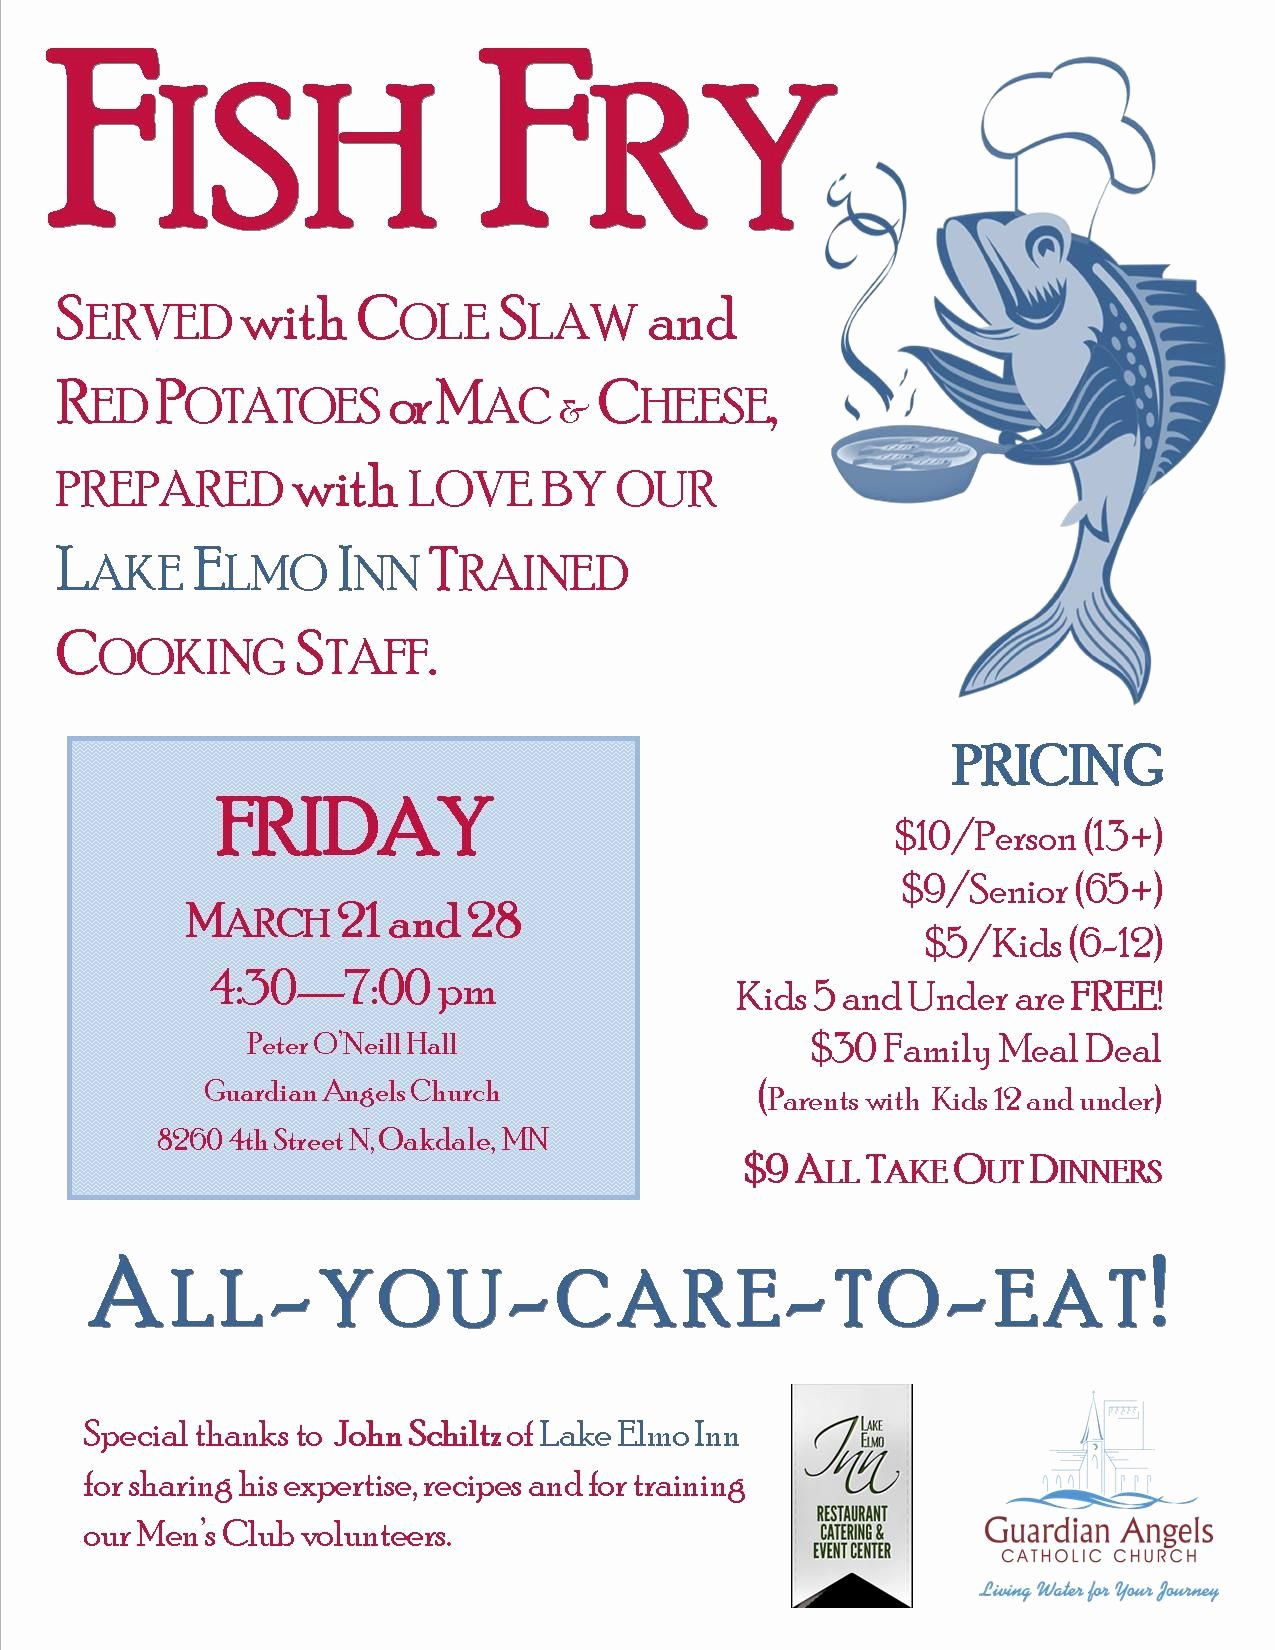 Fish Fry Fundraiser Flyer Awesome Fish Fry event Posters